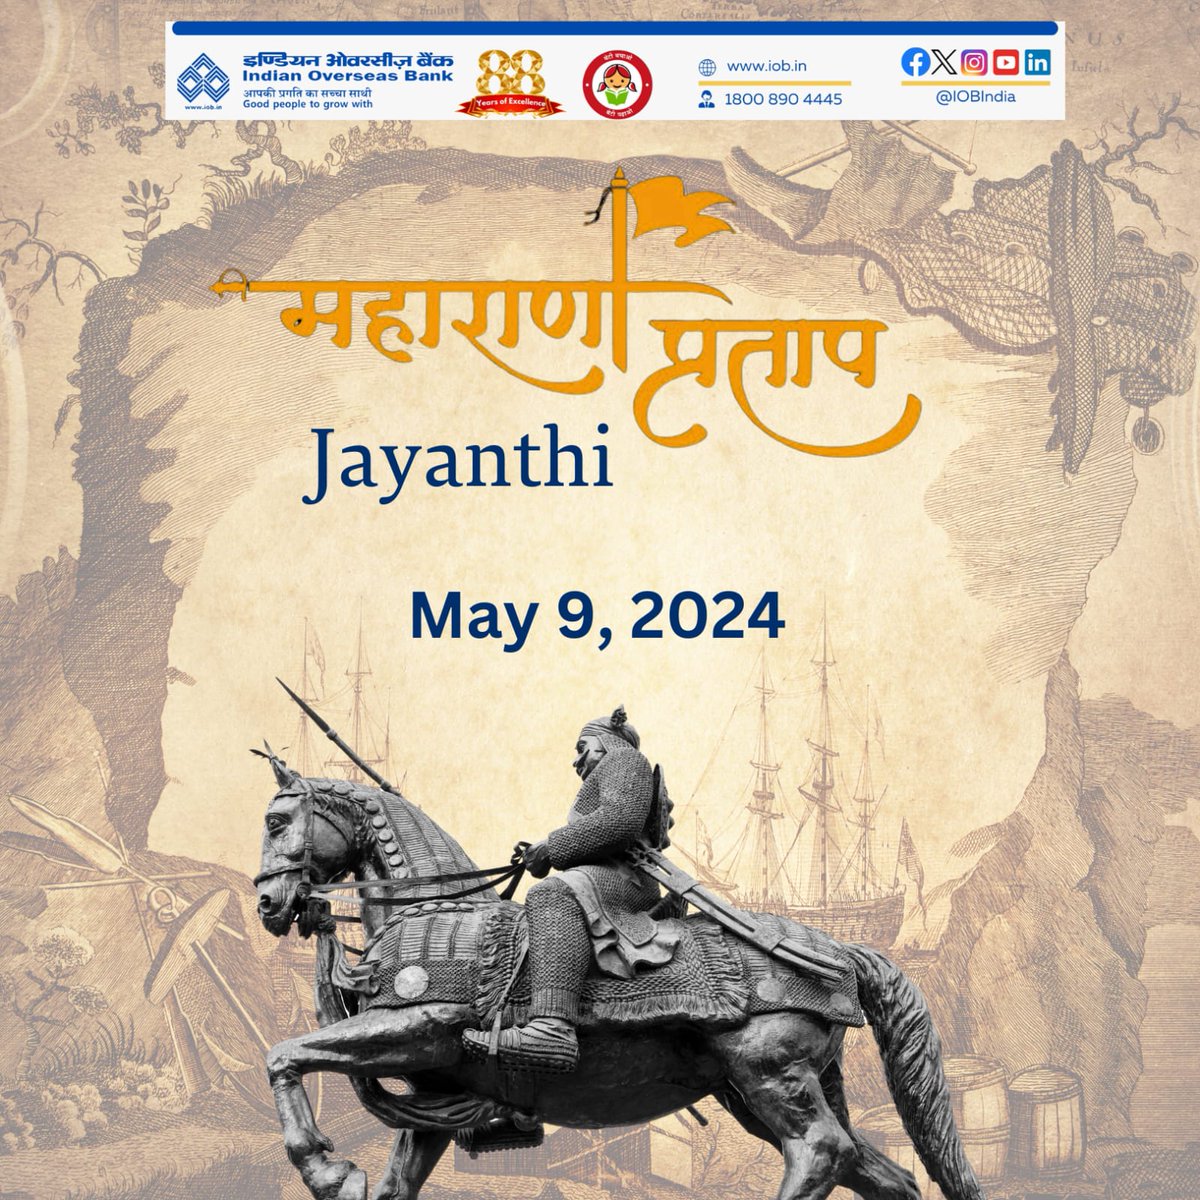 Remembering the legendary Maharana Pratap on his Jayanti. A symbol of courage, valor, and indomitable spirit. Let's draw inspiration from his legacy of bravery. #maharanapratap #MaharanaPratapJayanti #IOB #IndianOverseasBank #DFS #RBI